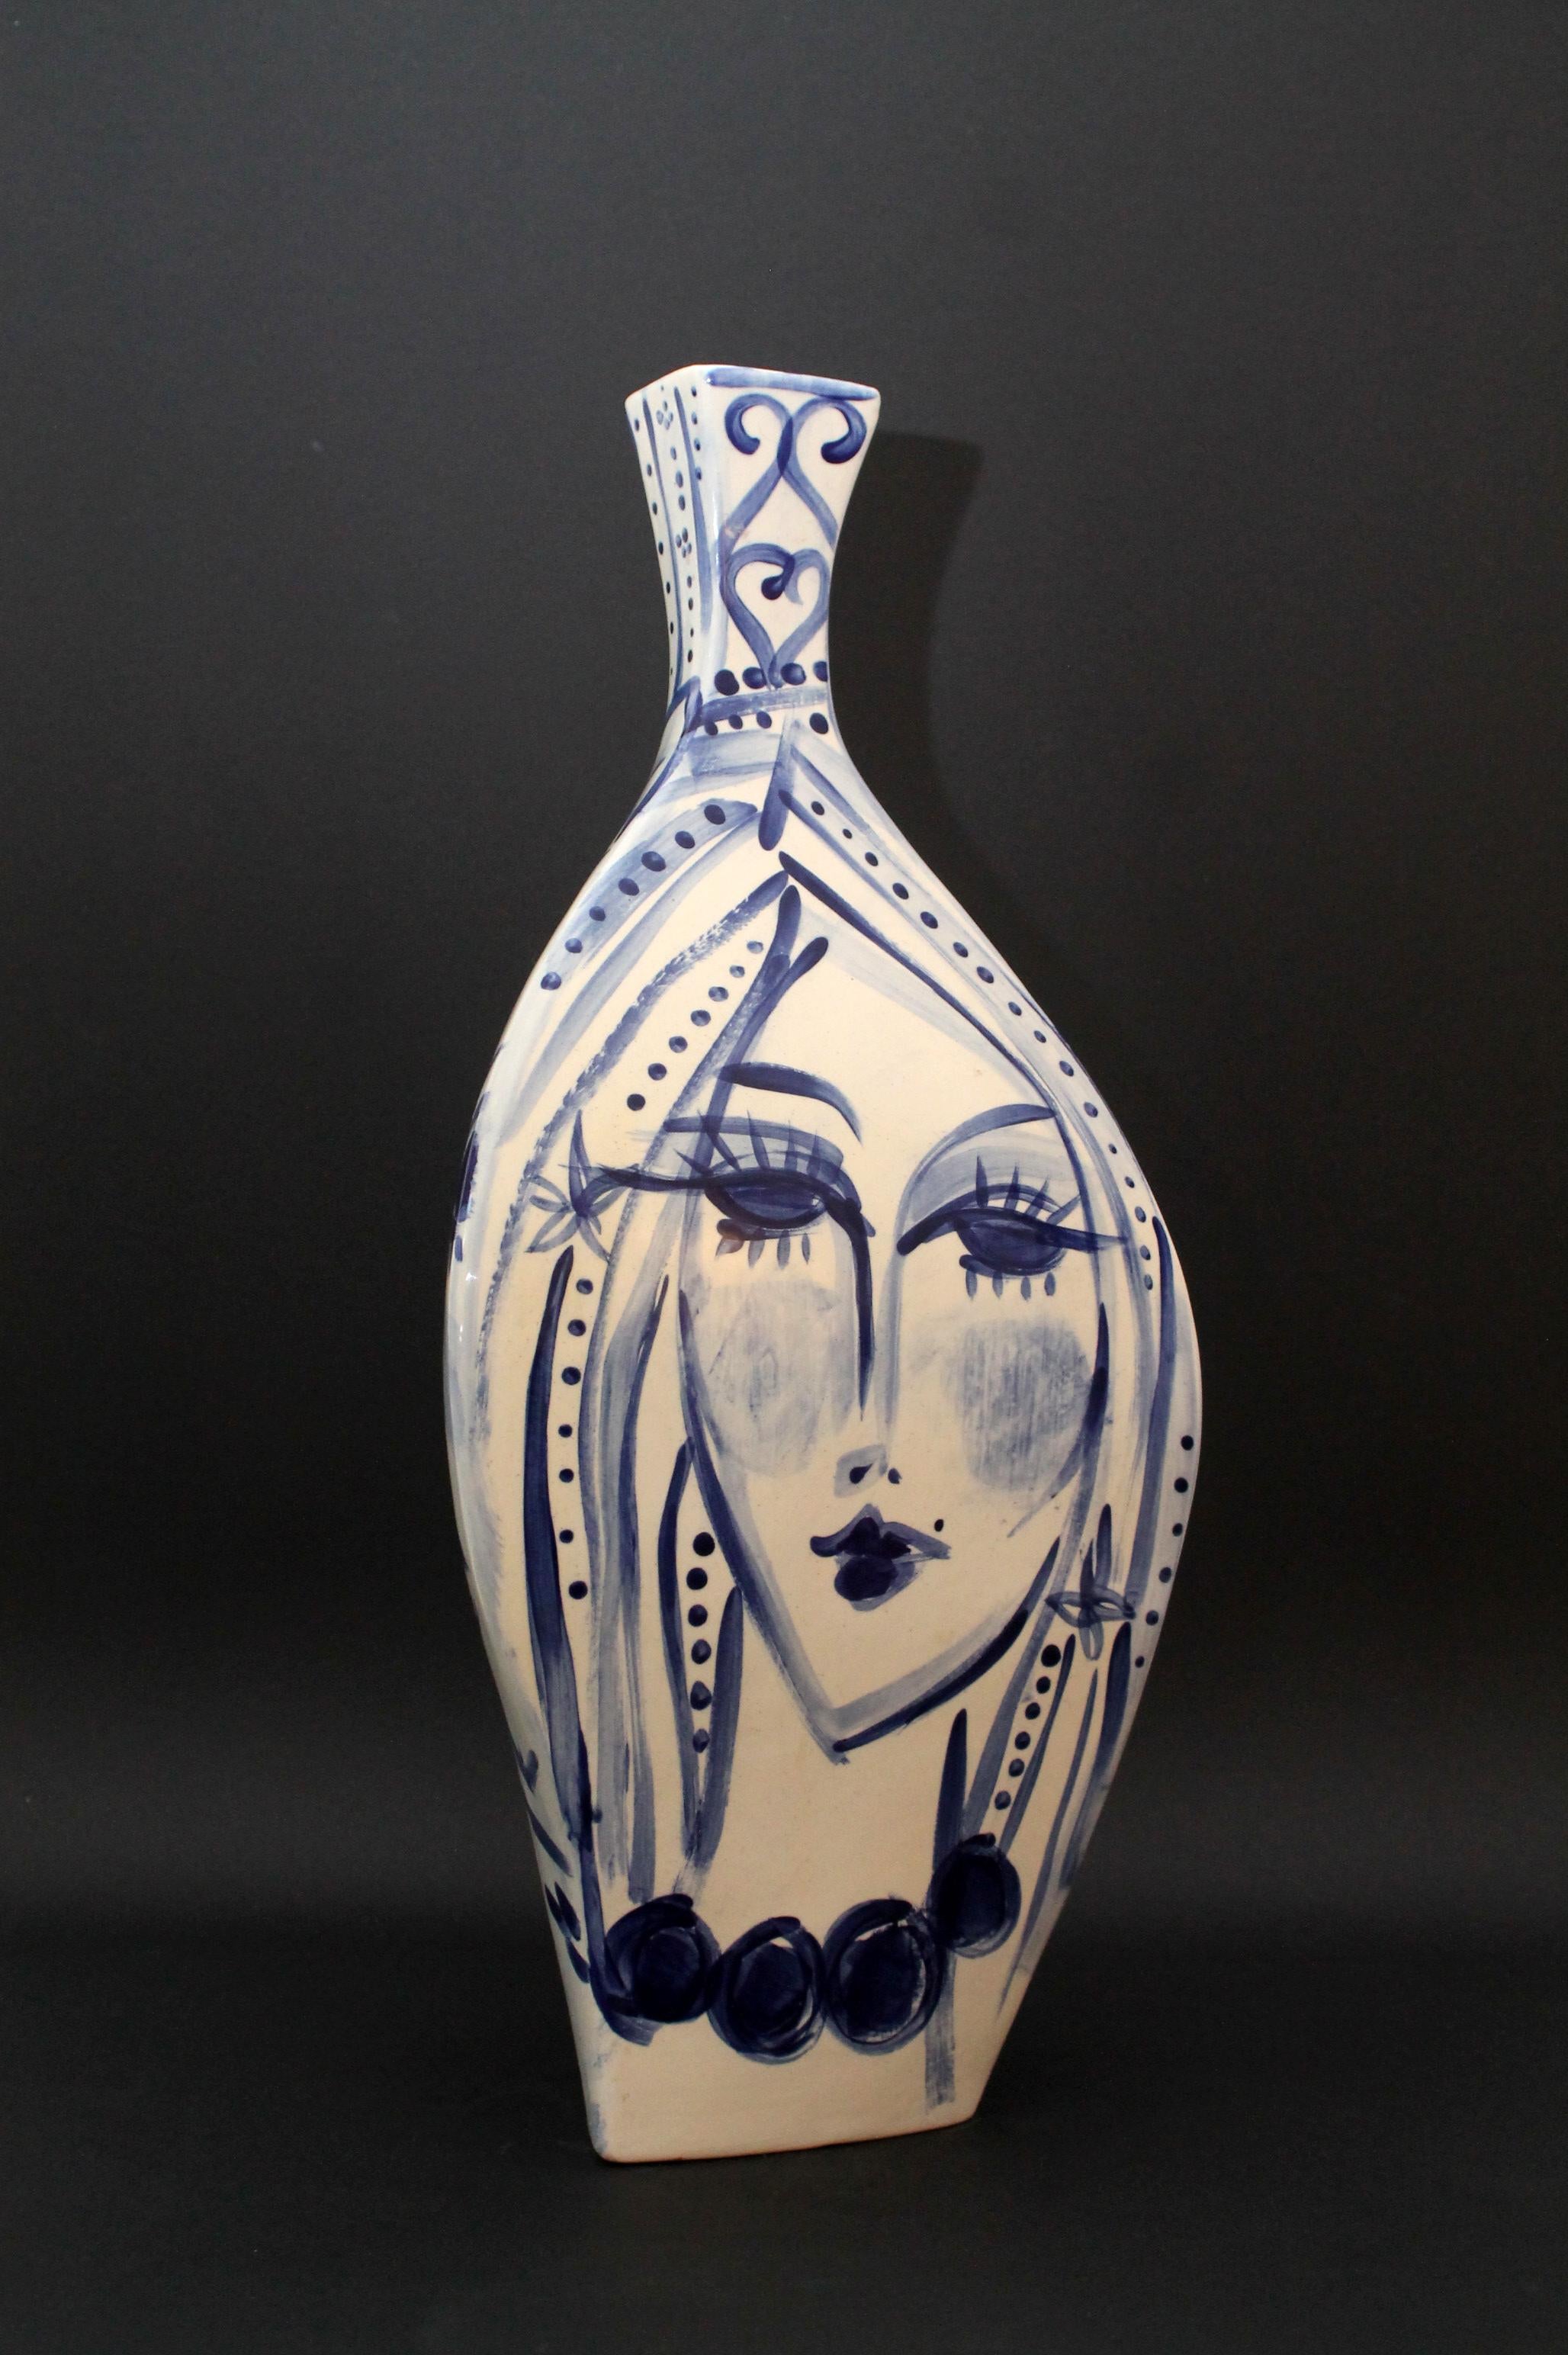 Cris Conde )) Amorphous (hand crafted/painted) signed ceramic vase (55x23x21cm) For Sale 7